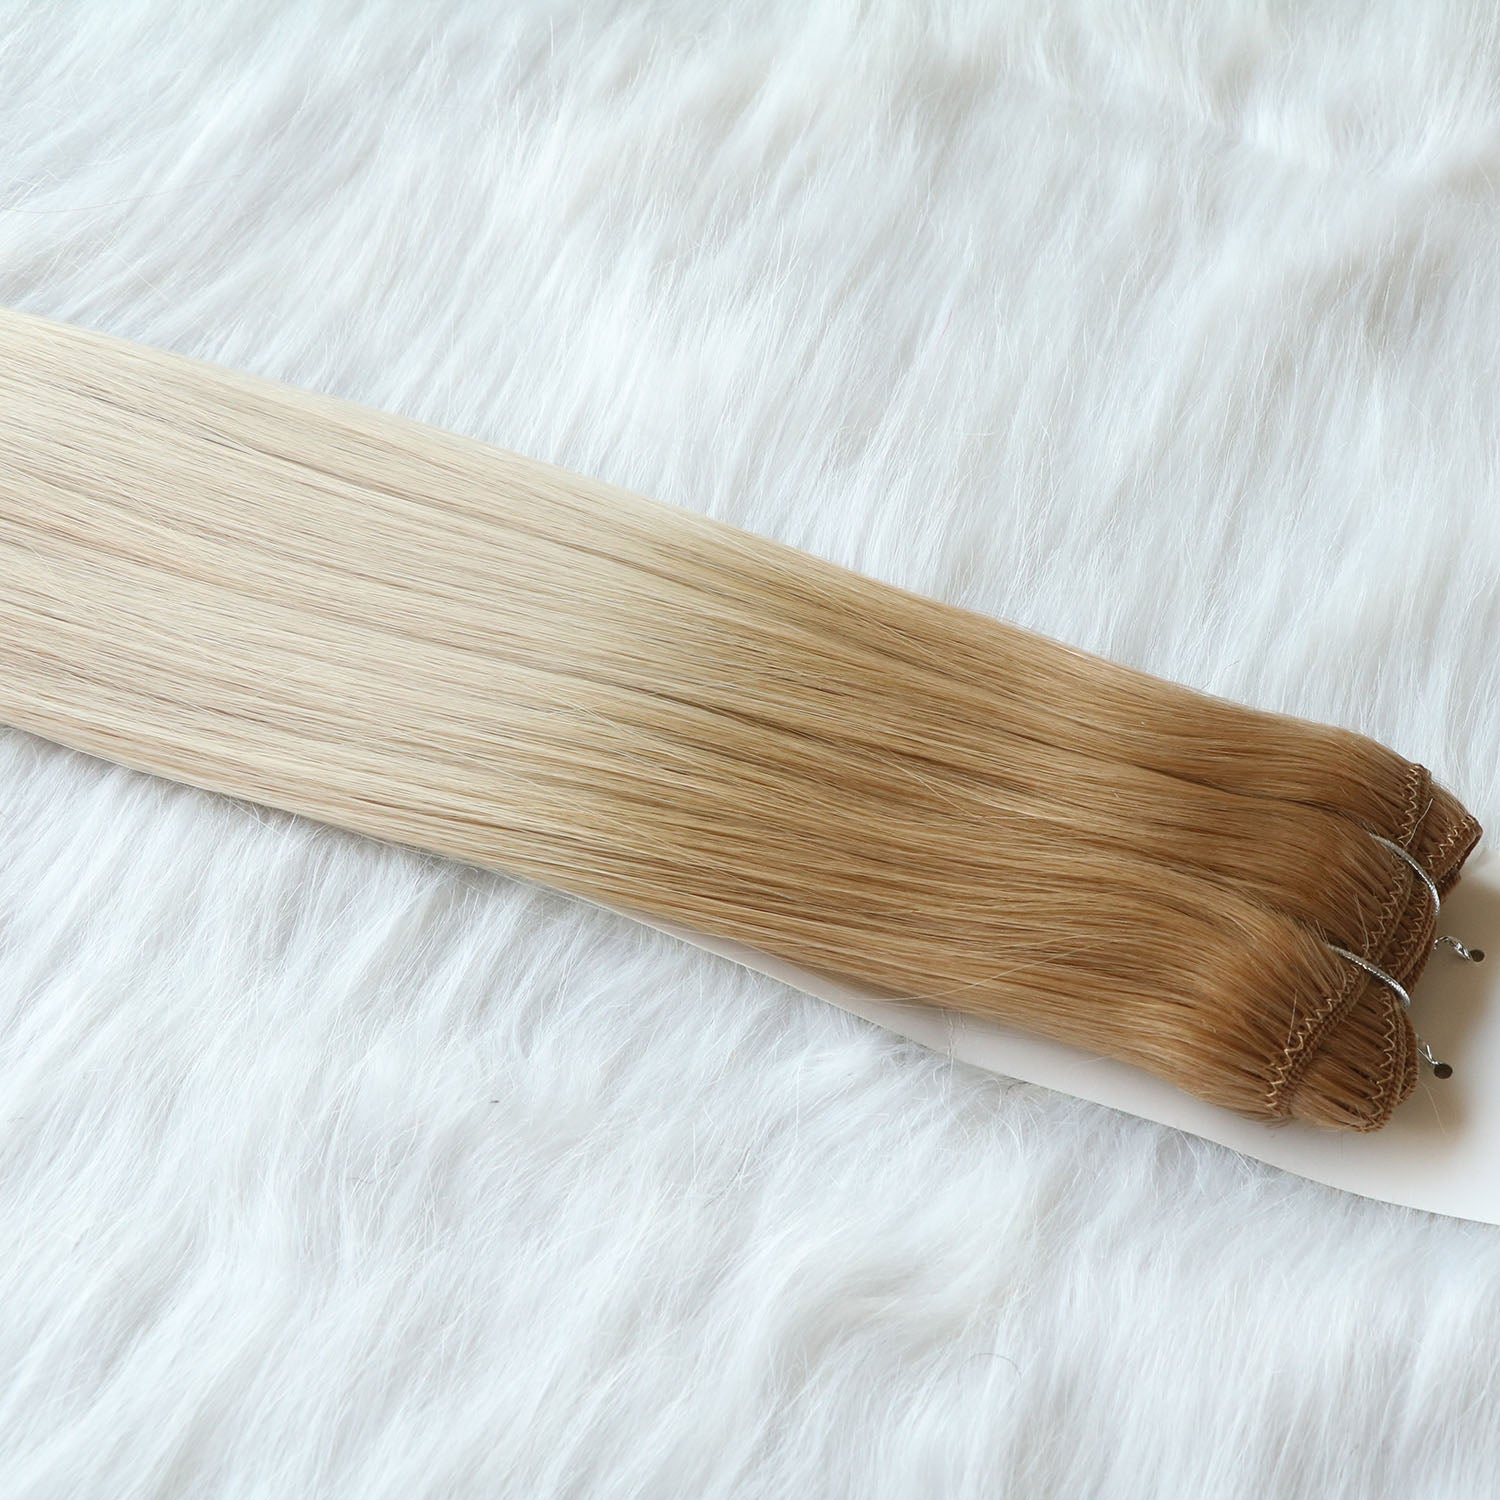 3 Layers Virgin Human Hair Volume Wefts Extensions